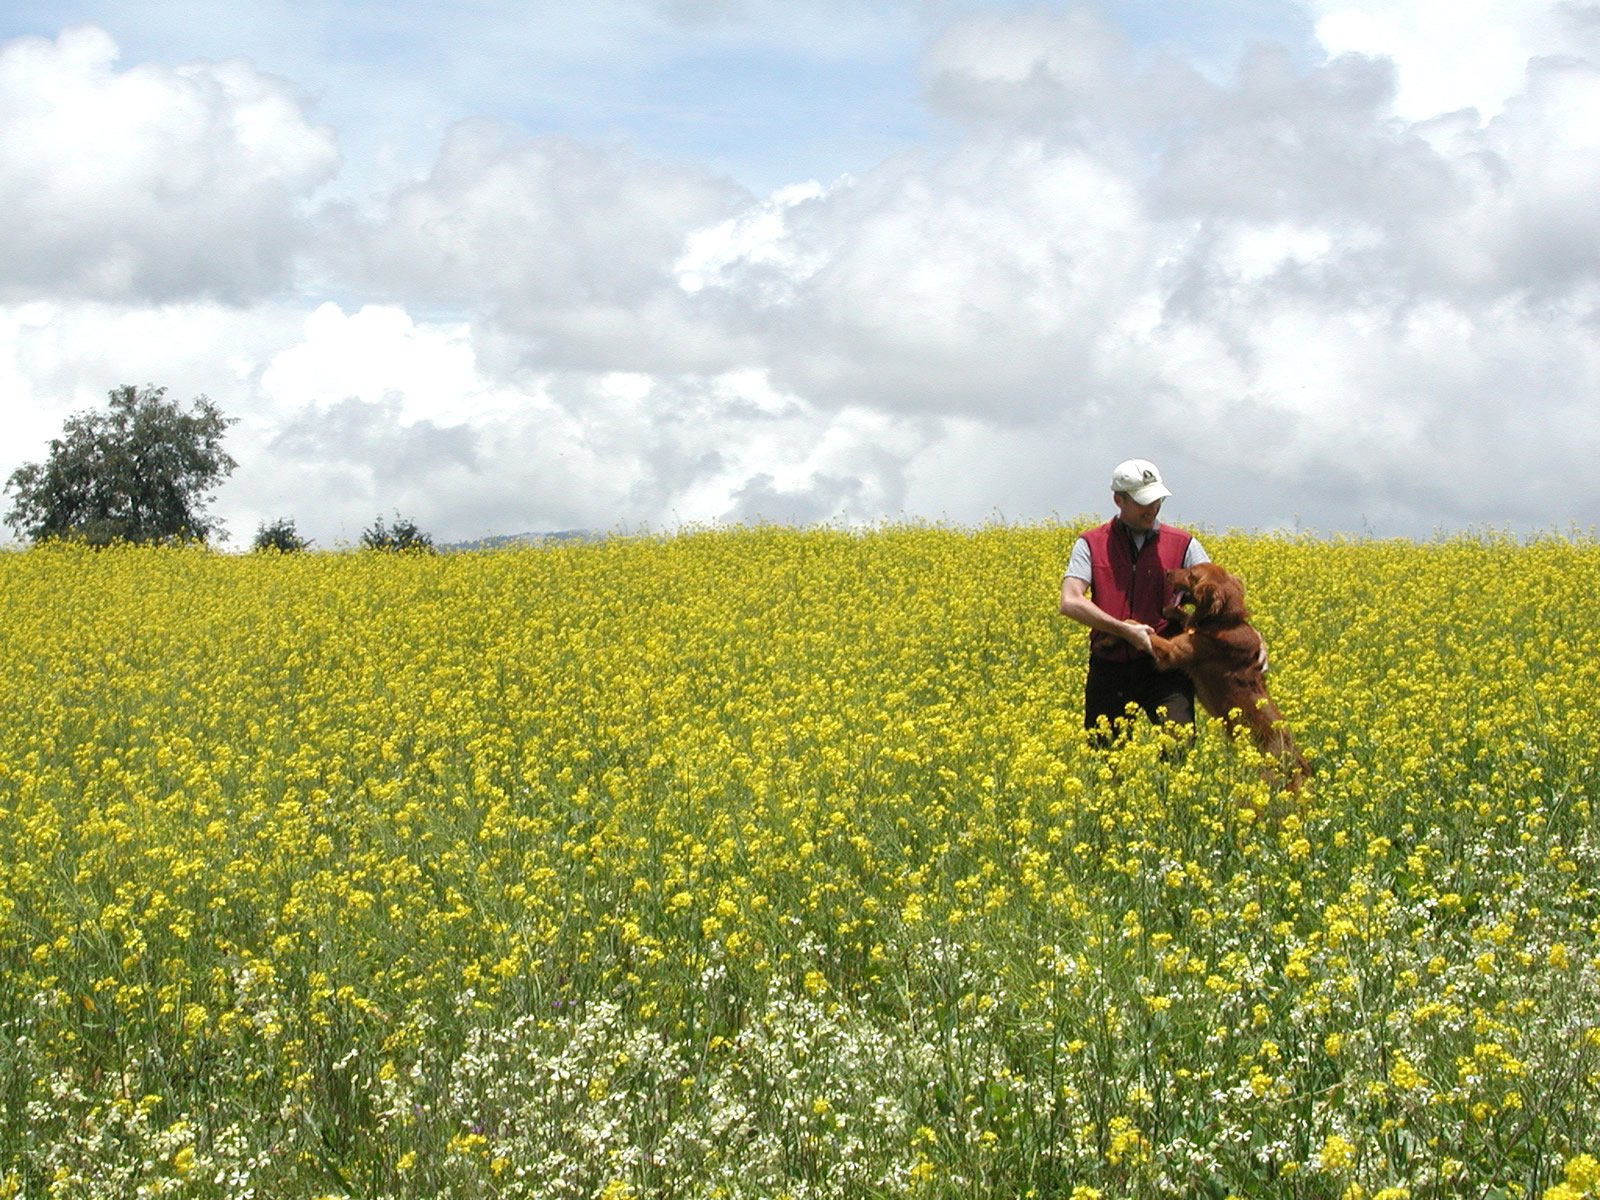 a person is standing in a field of yellow flowers